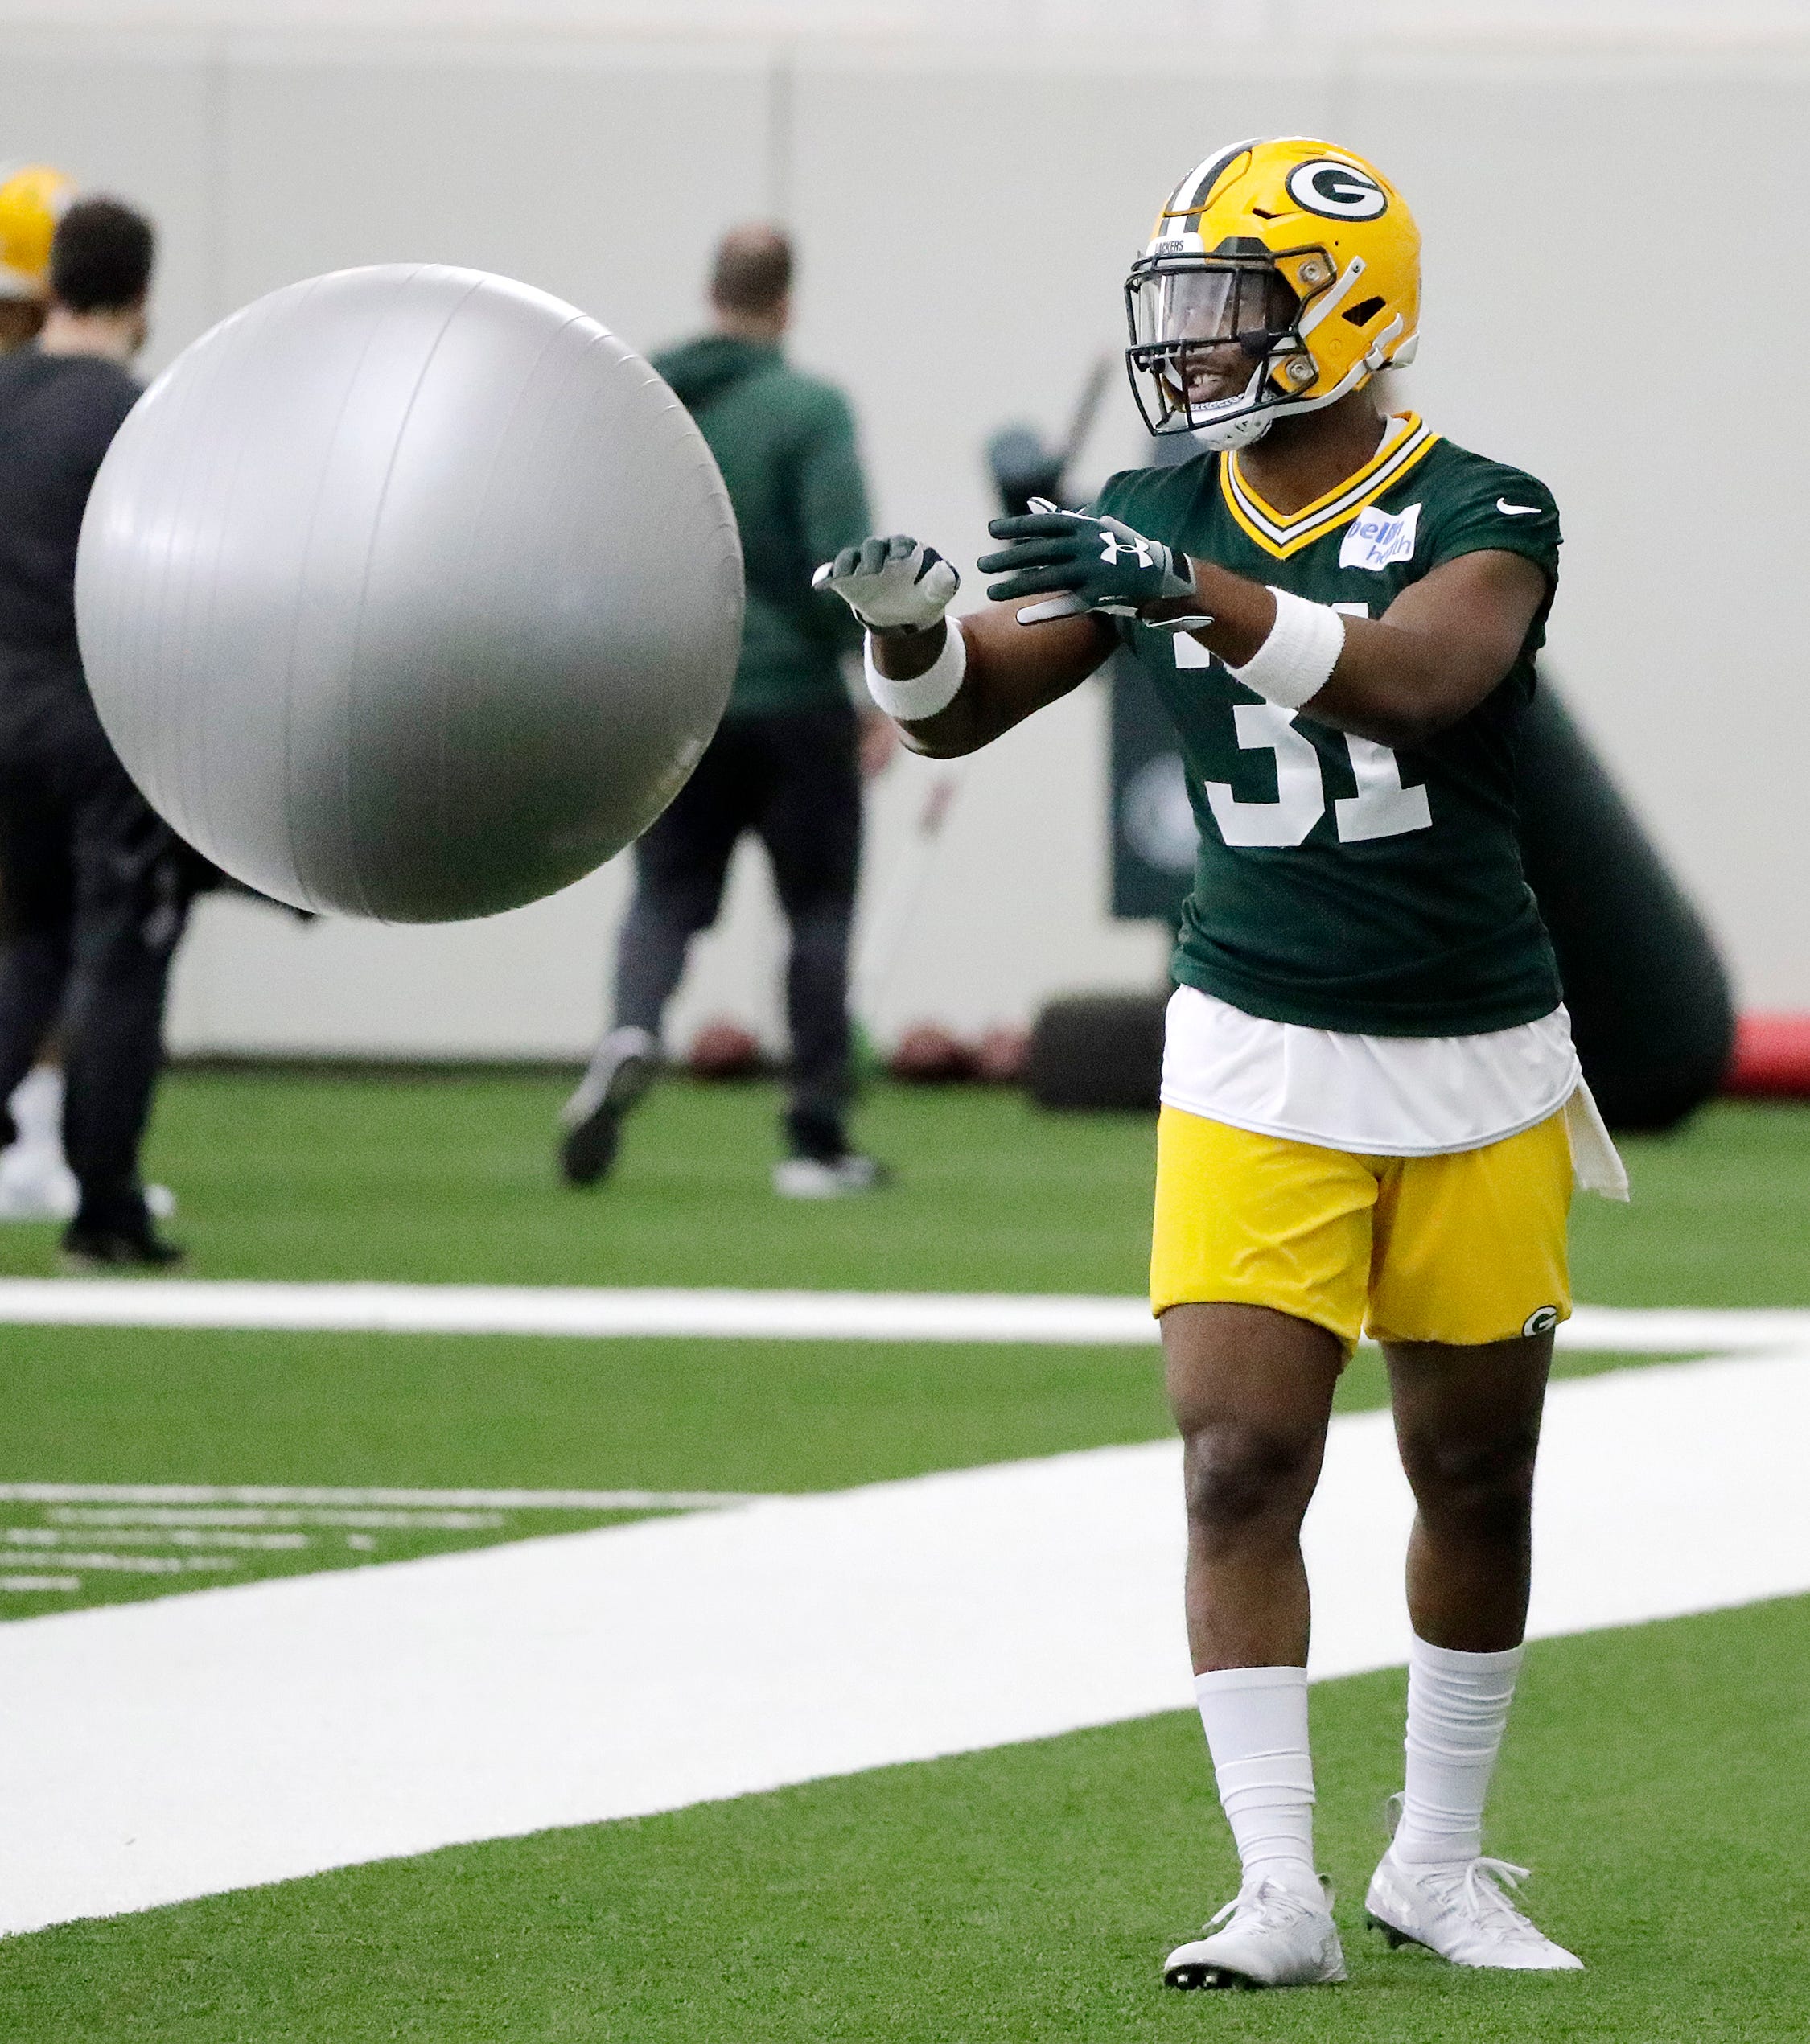 Green Bay Packers safety Adrian Amos (31) during a team practice at the Don Hutson Center on Wednesday, April 24, 2019 in Ashwaubenon, Wis.